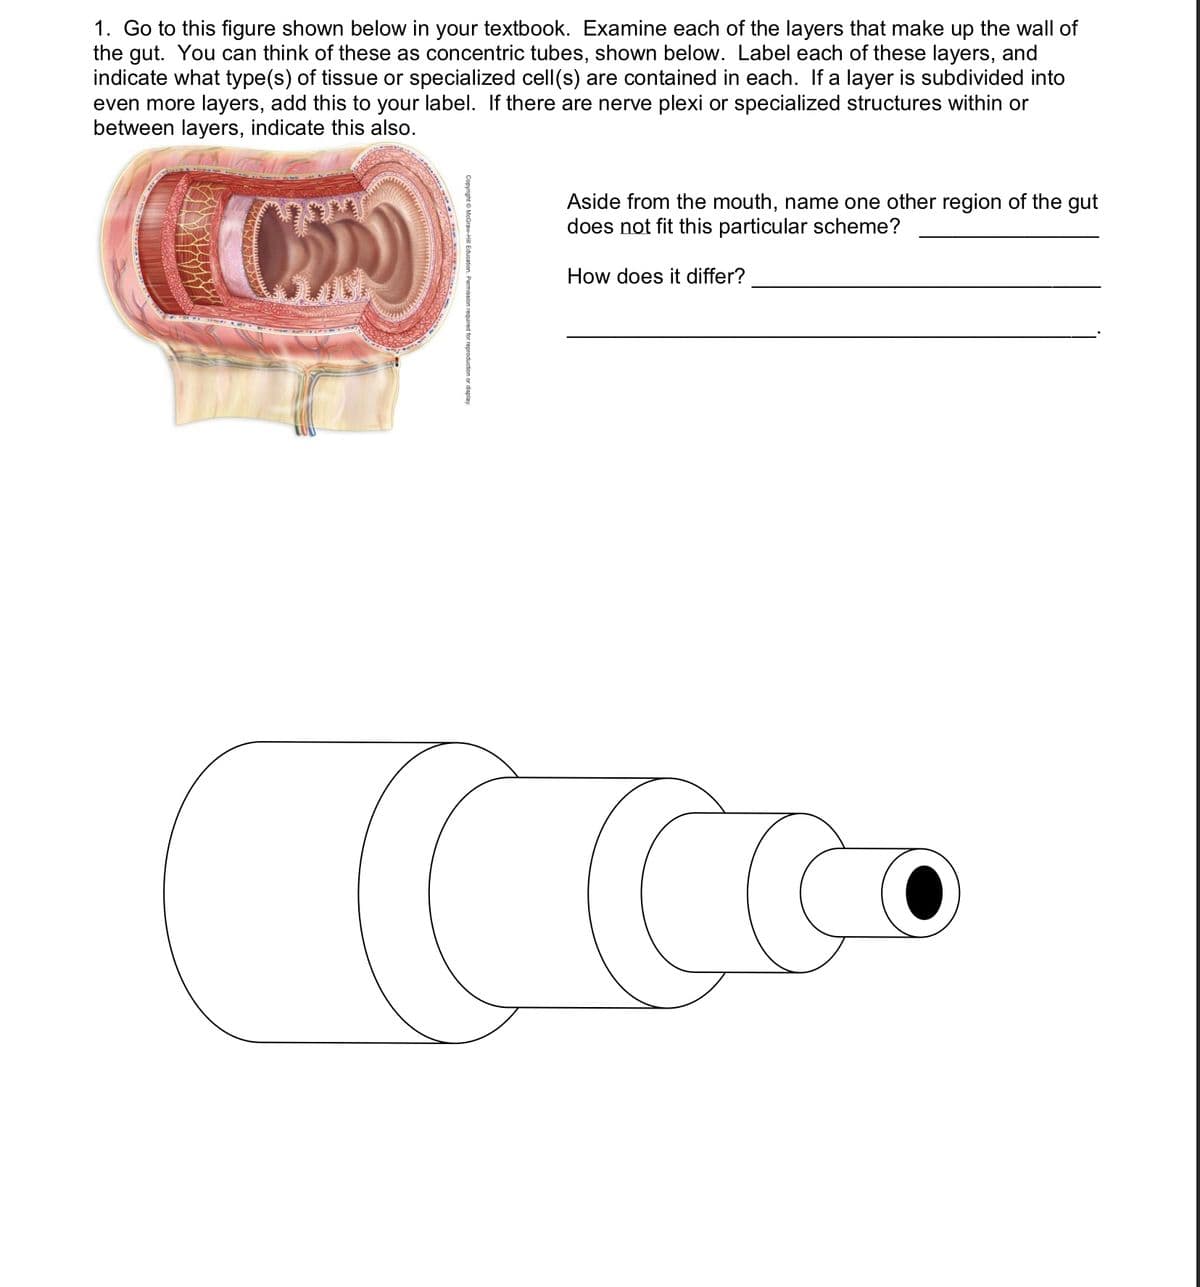 1. Go to this figure shown below in your textbook. Examine each of the layers that make up the wall of
the gut. You can think of these as concentric tubes, shown below. Label each of these layers, and
indicate what type(s) of tissue or specialized cell(s) are contained in each. If a layer is subdivided into
even more layers, add this to your label. If there are nerve plexi or specialized structures within or
between layers, indicate this also.
Aside from the mouth, name one other region of the gut
does not fit this particular scheme?
How does it differ?
(CCCO
Copyright © McGraw-H Education. Permission required for reproductio
